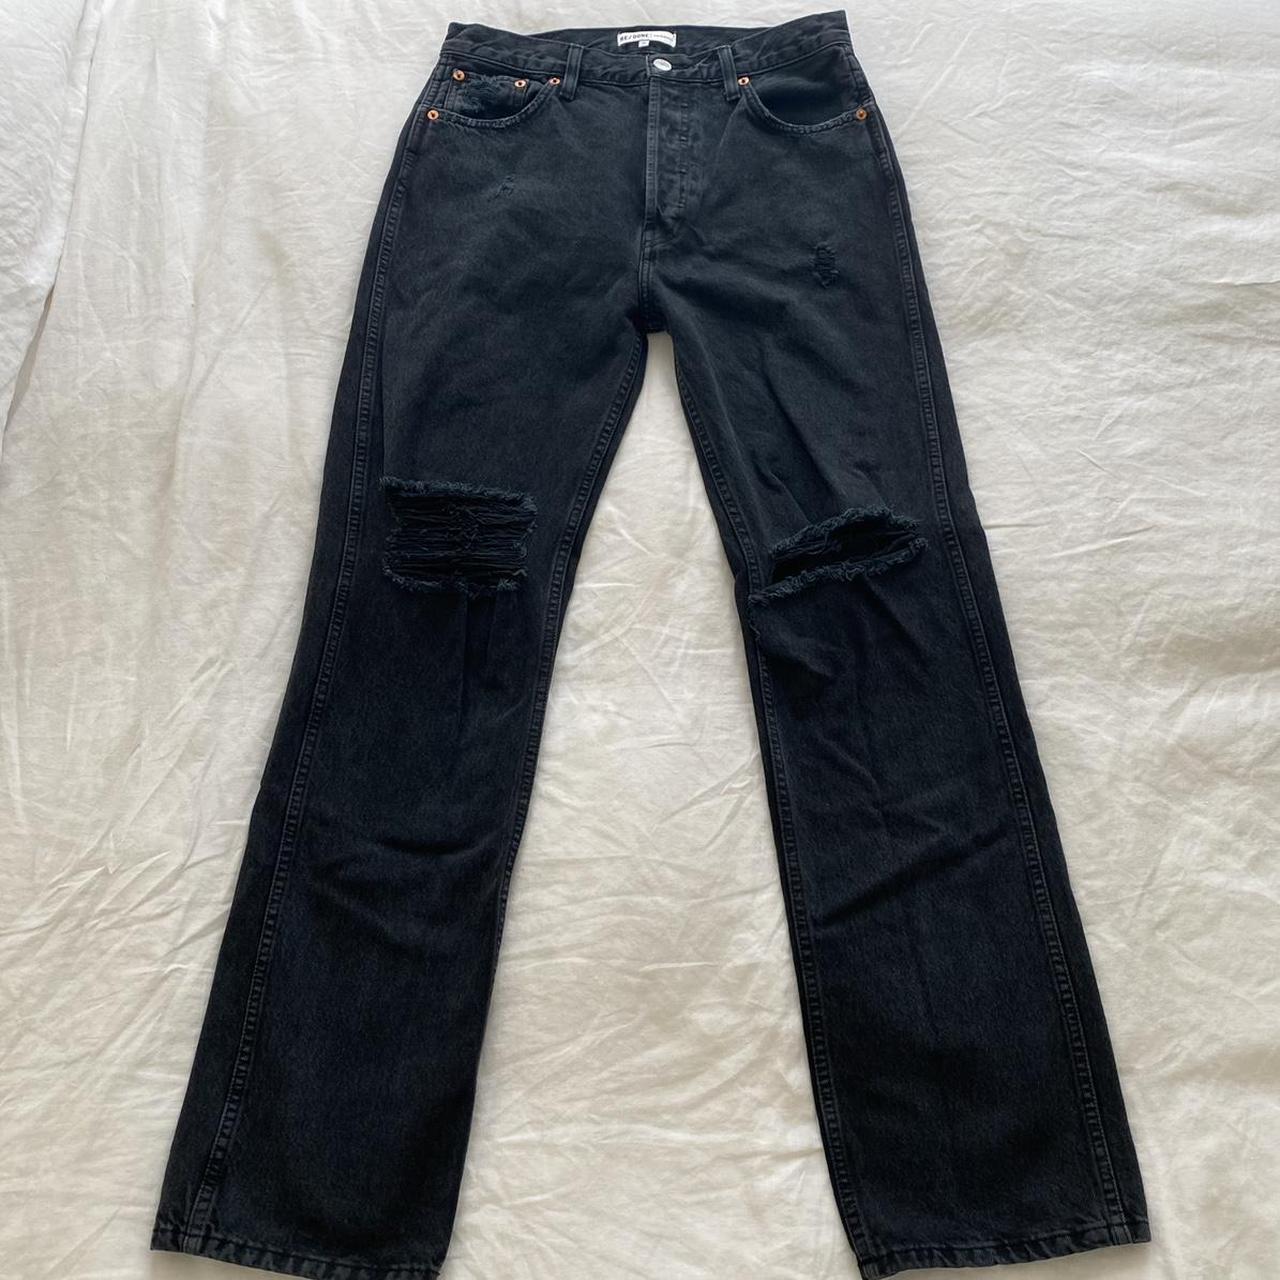 Product Image 2 - Redone High Rise Loose Jeans

Washed